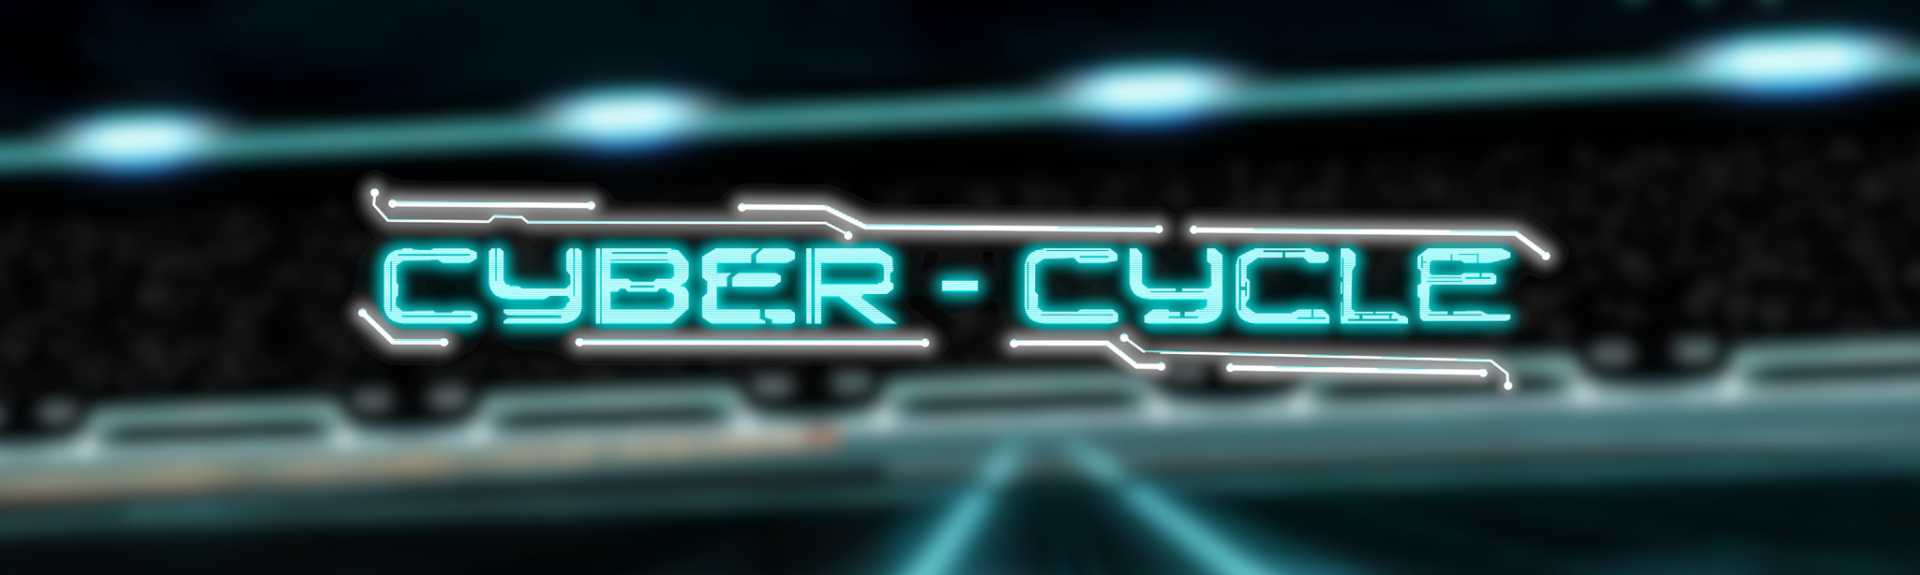 CYBER CYCLE